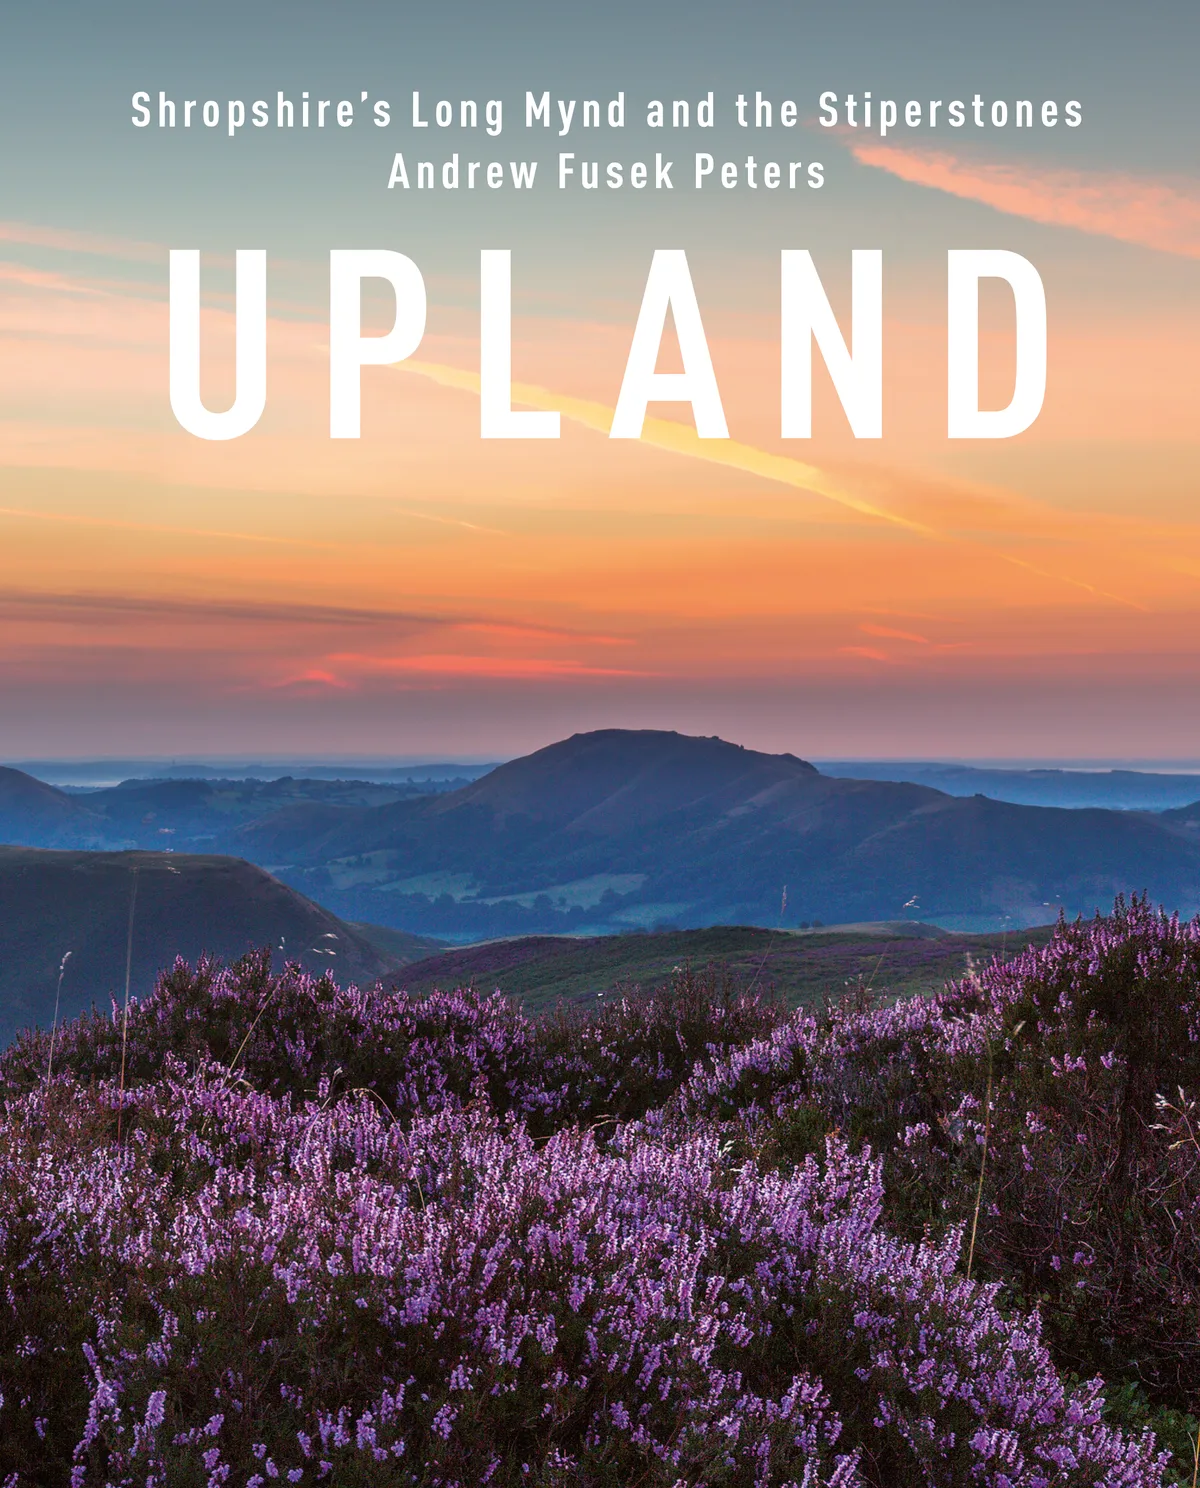 When the heather blooms in August, the whole Long Mynd turns purple and the best time to catch the views over Shropshire towards the far Wrekin is before dawn © Andrew Fusek Peters